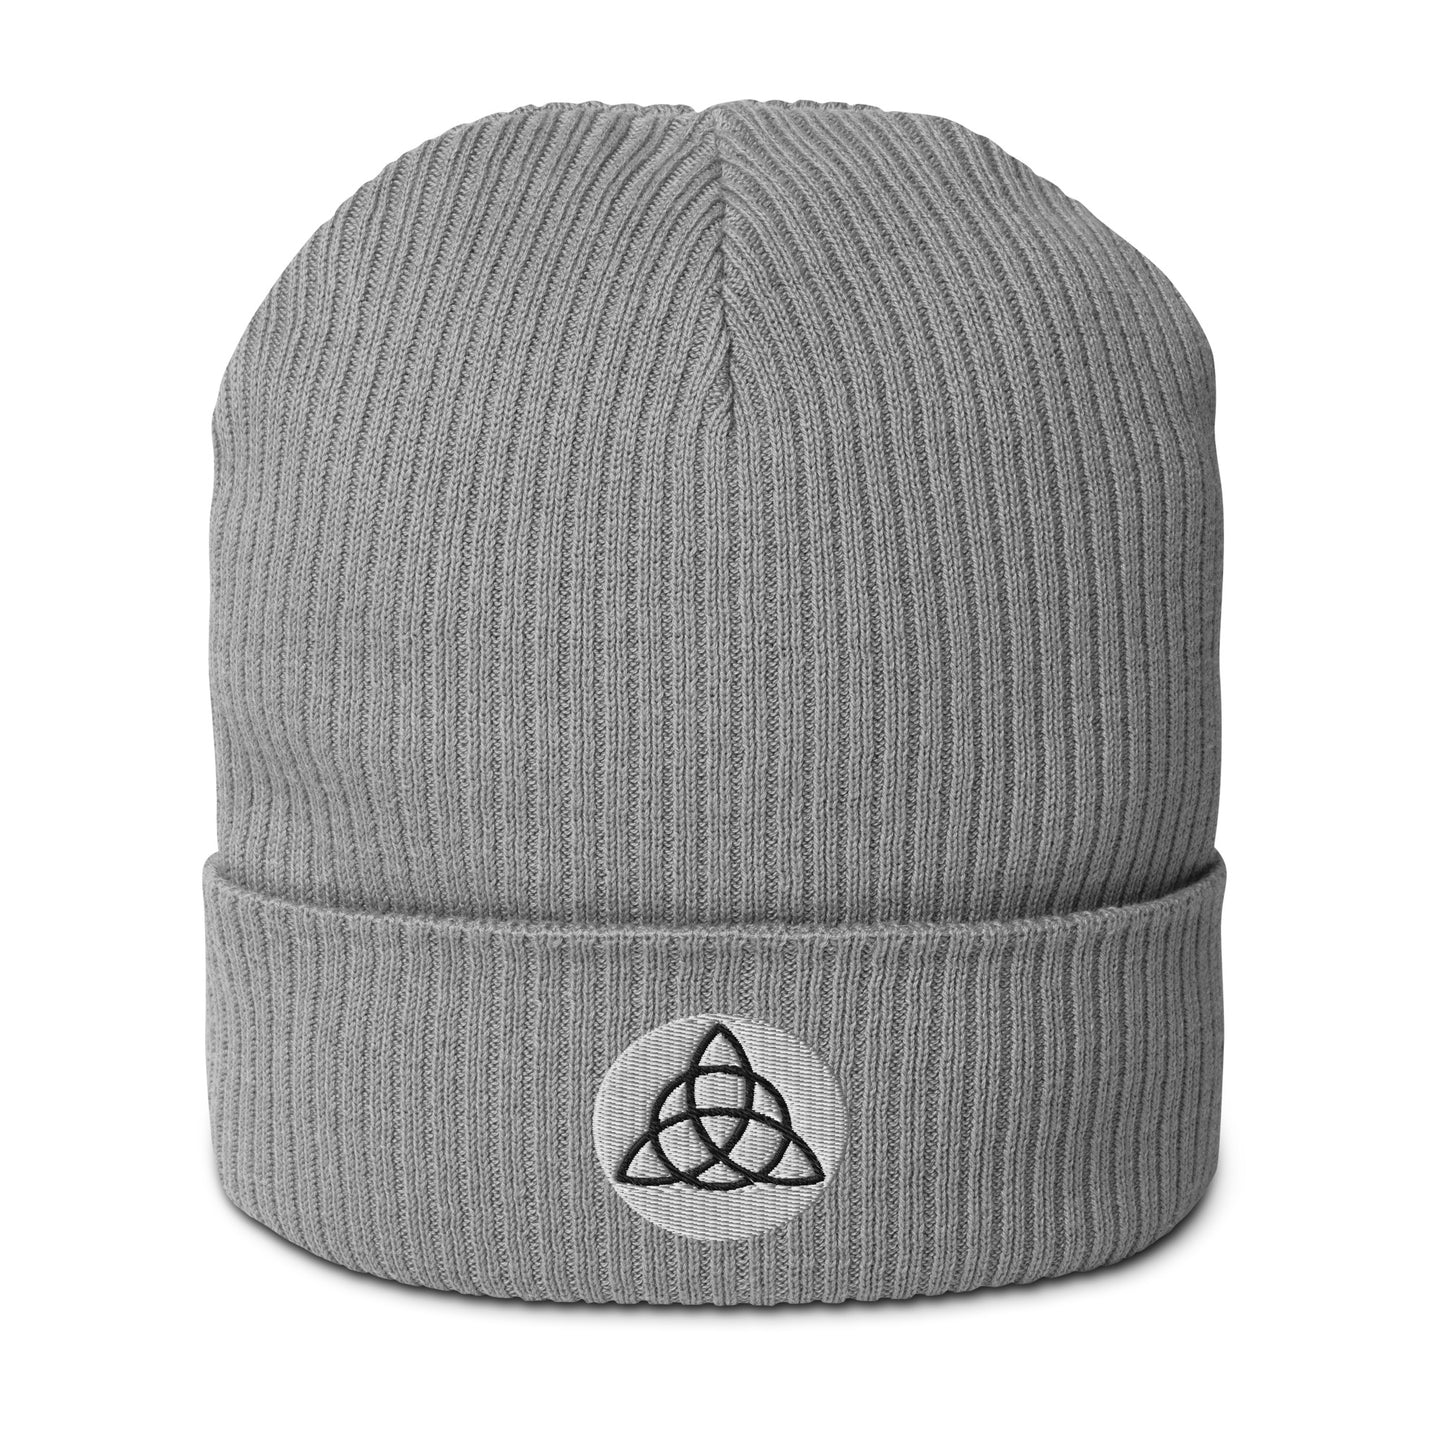  A ribbed beanie in Cloudy Gray hat made of organic cotton, embroidered with a Triquetra symbol, symbolizing unity, eternity, and the interconnectedness of mind, body, and spirit. This organic ribbed beanie is chic, versatile, and environmentally conscious, making it an essential addition to your hat collection. Crafted from breathable lightweight fabric, it's suitable for both indoor and outdoor wear. Made with hypoallergenic and natural materials. 